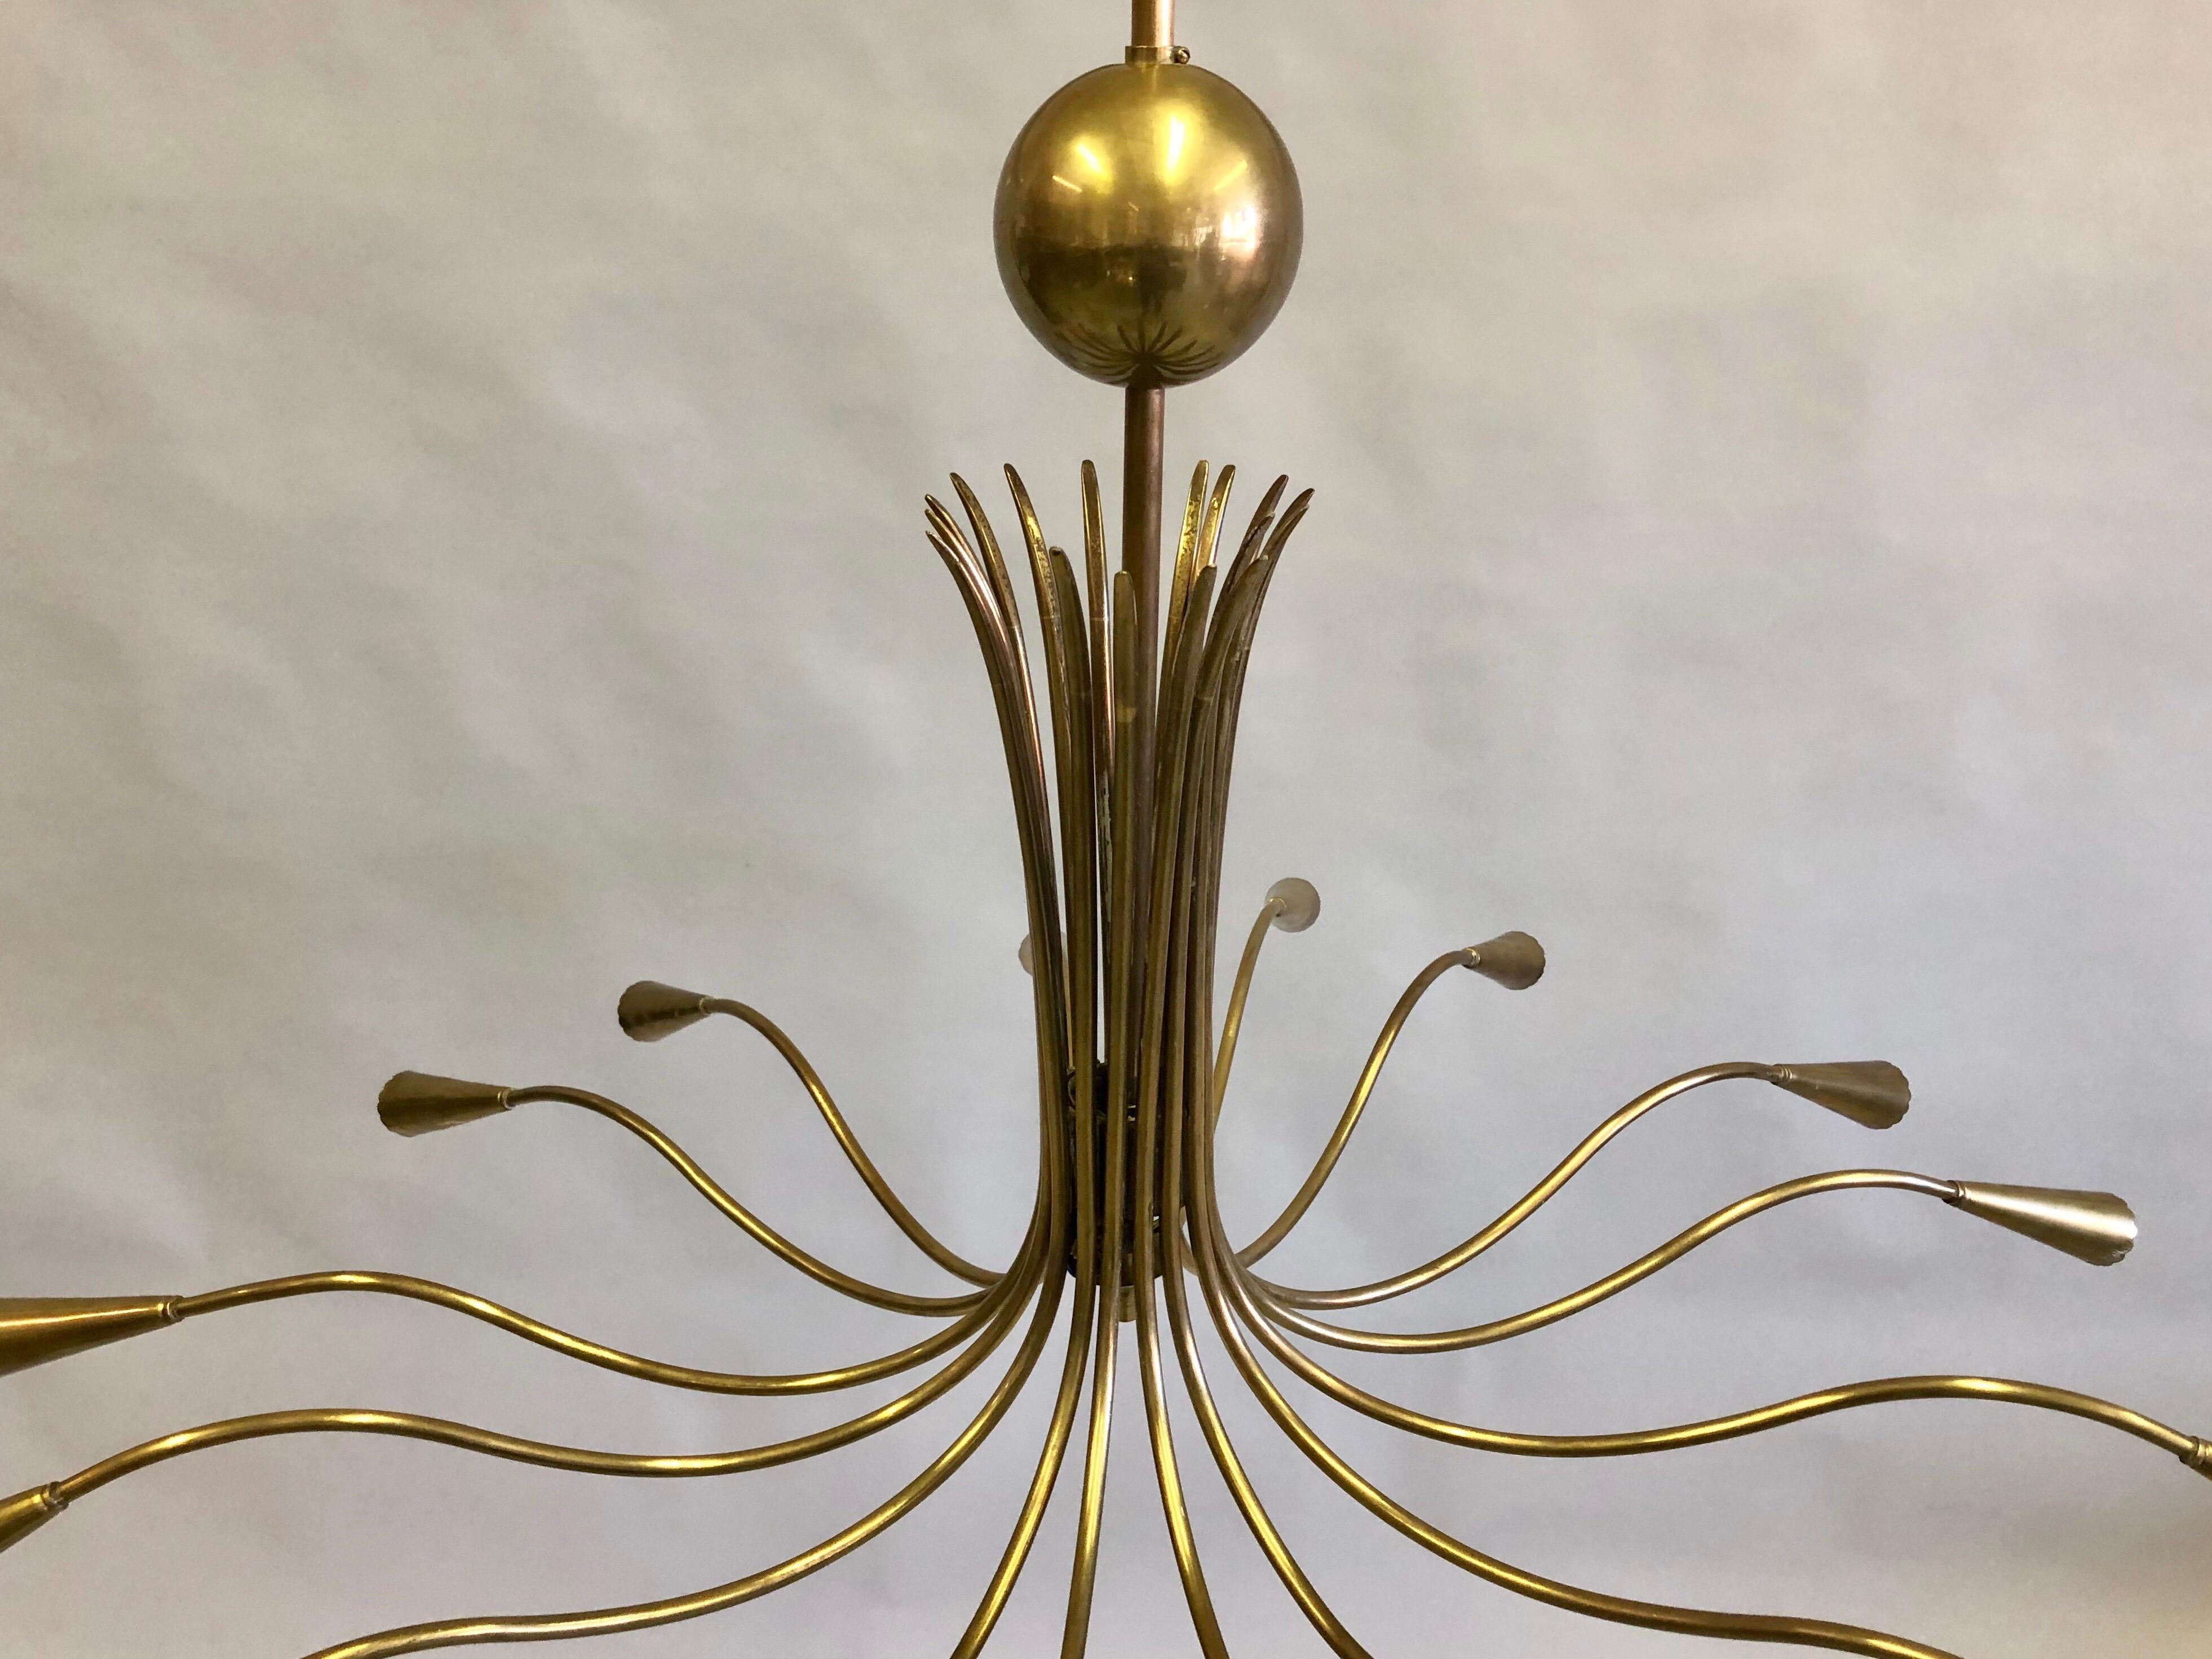 Elegant Italian Mid-Century Modern brass pendant / chandelier by Stilnovo. The chandelier is composed entirely of brass with natural antique patina and is circular / round in form with 16 arms. The piece has a sensuous gently undulating motion to